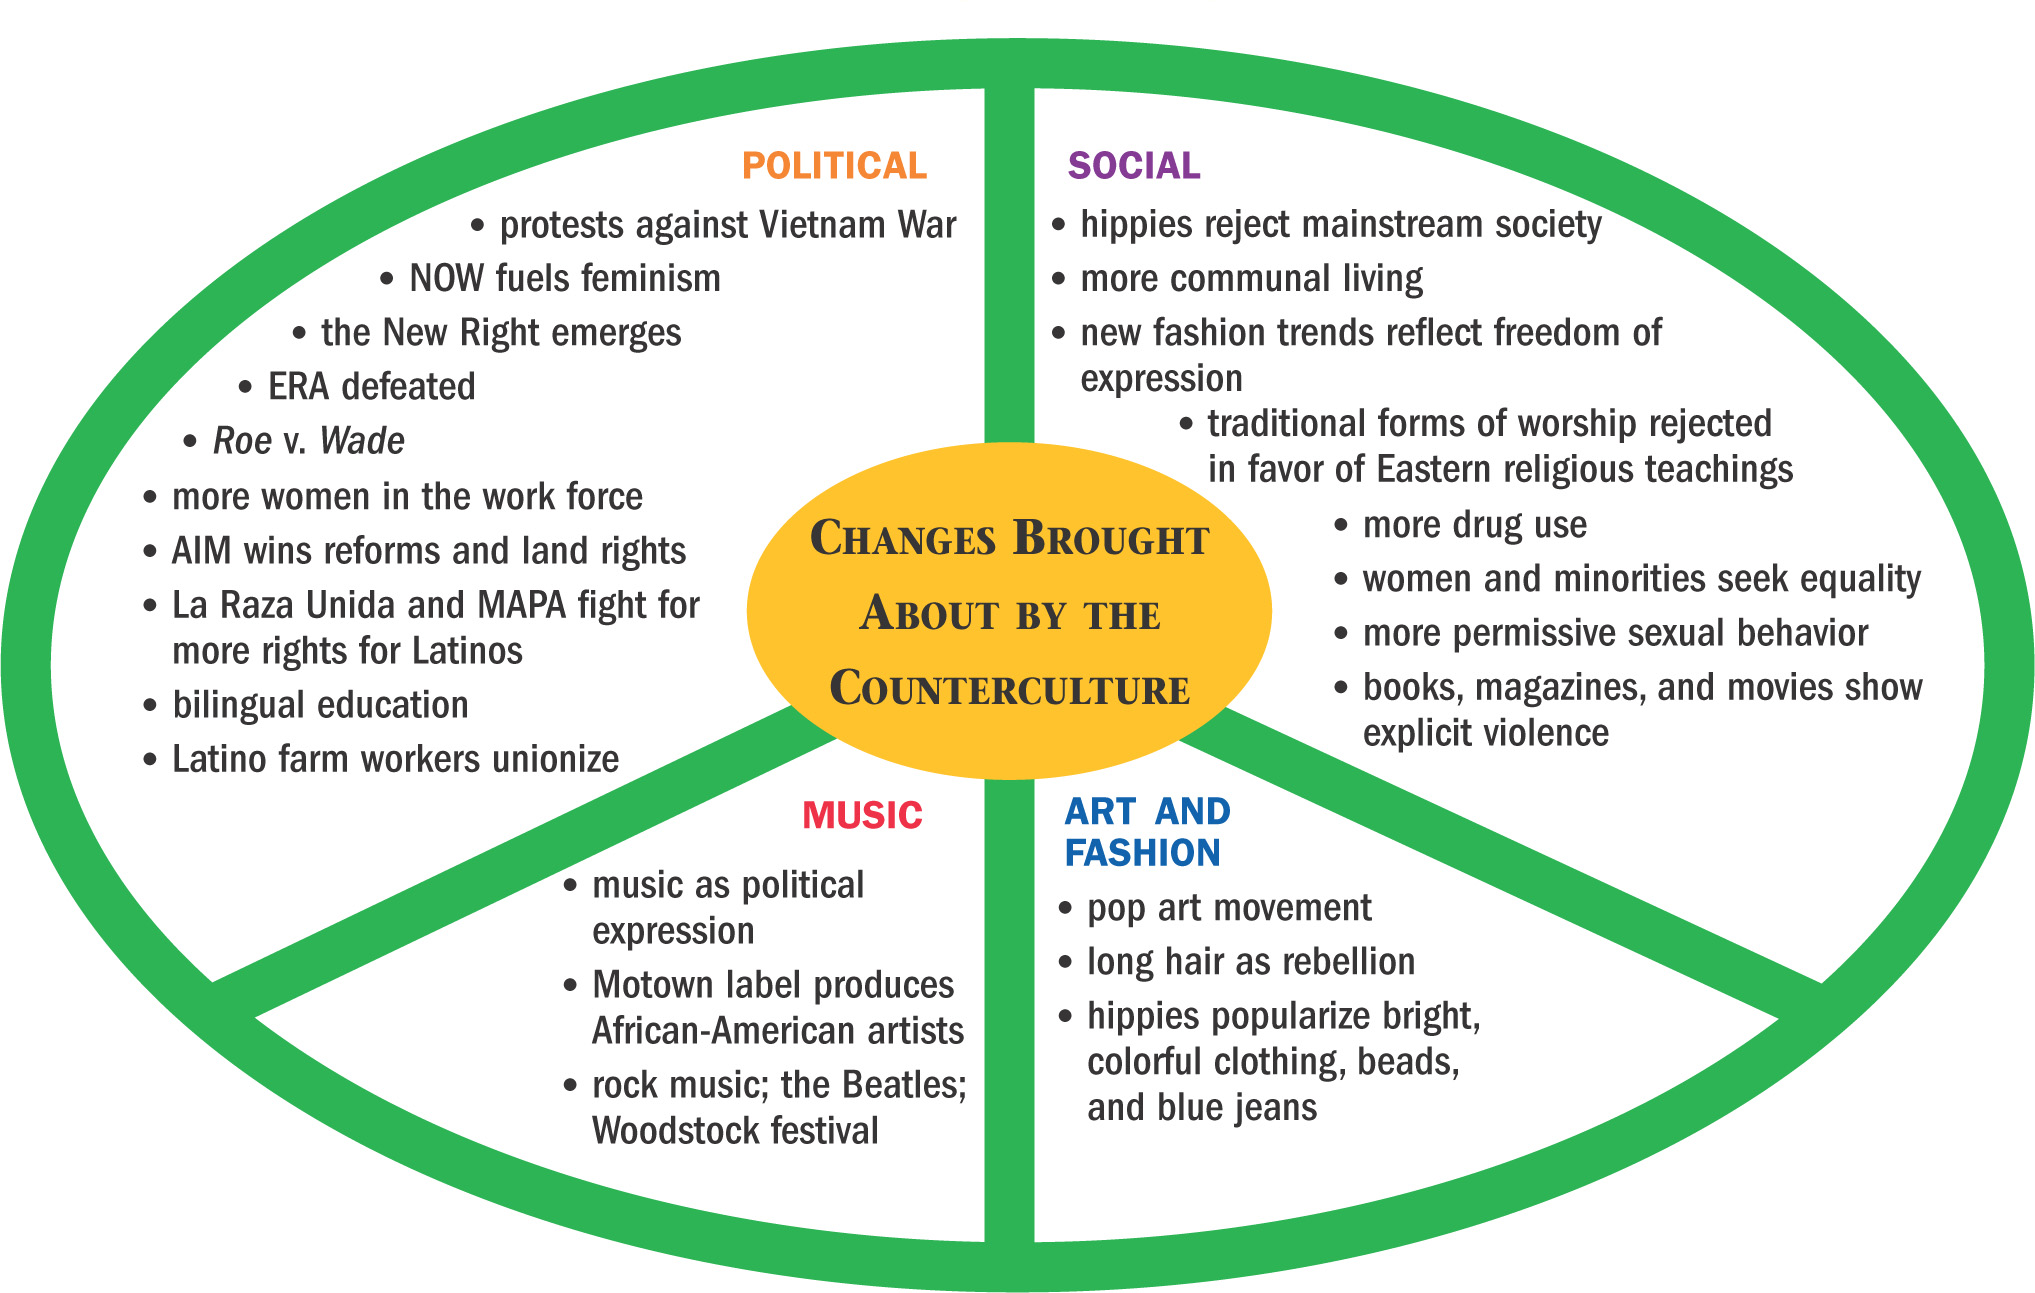 A chart in the shape of a peace symbol is labled Changes Brought About by the Counterculture. The chart is broken down into four sections: Political, Social, Music, Art and Fashion.